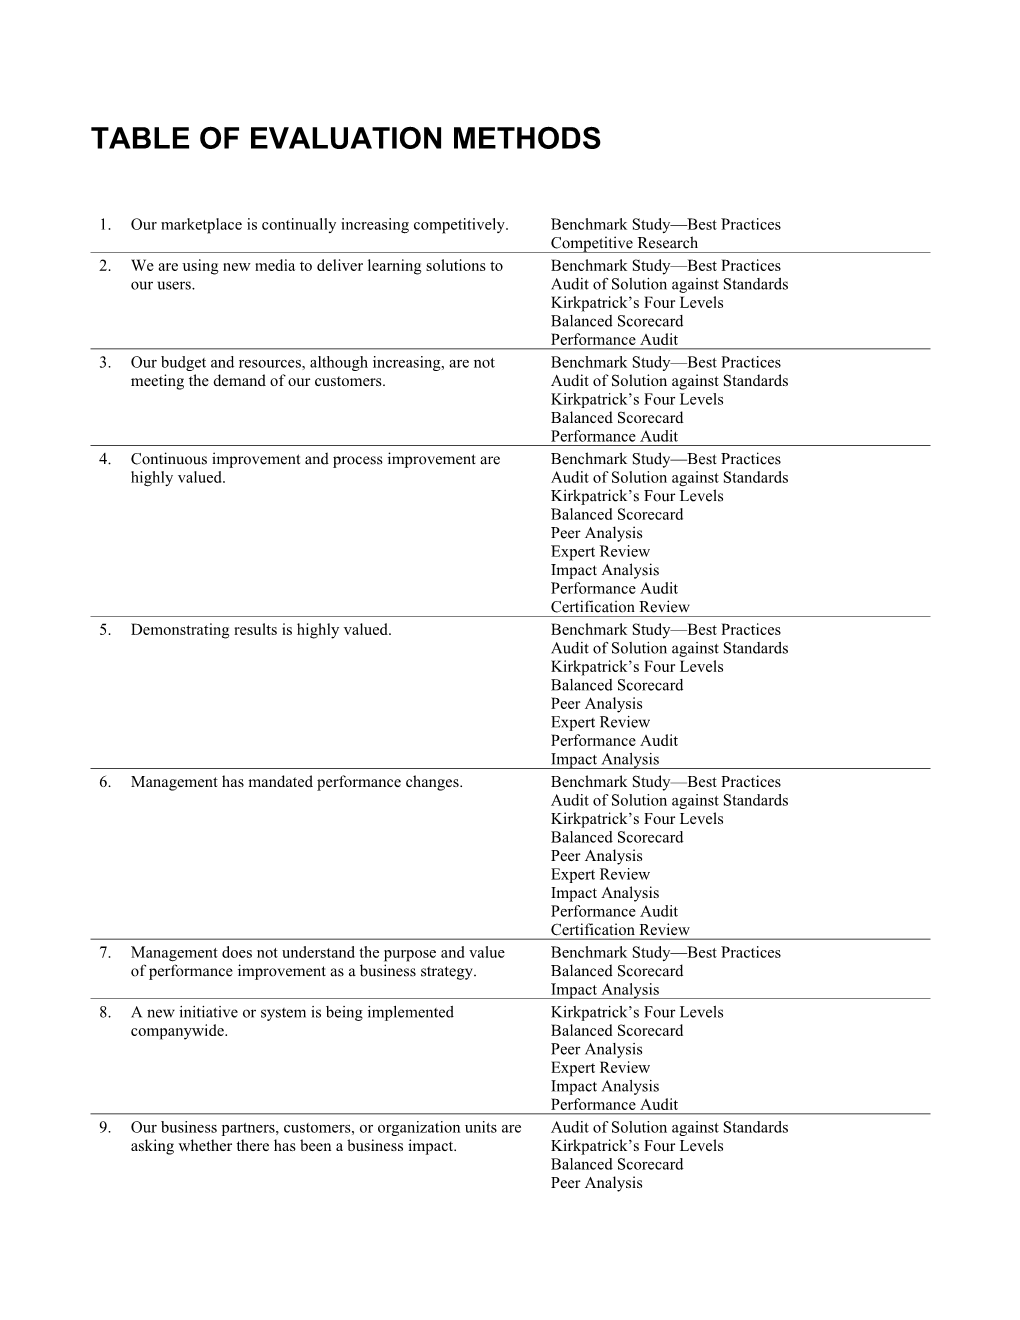 Table of Evaluation Methods